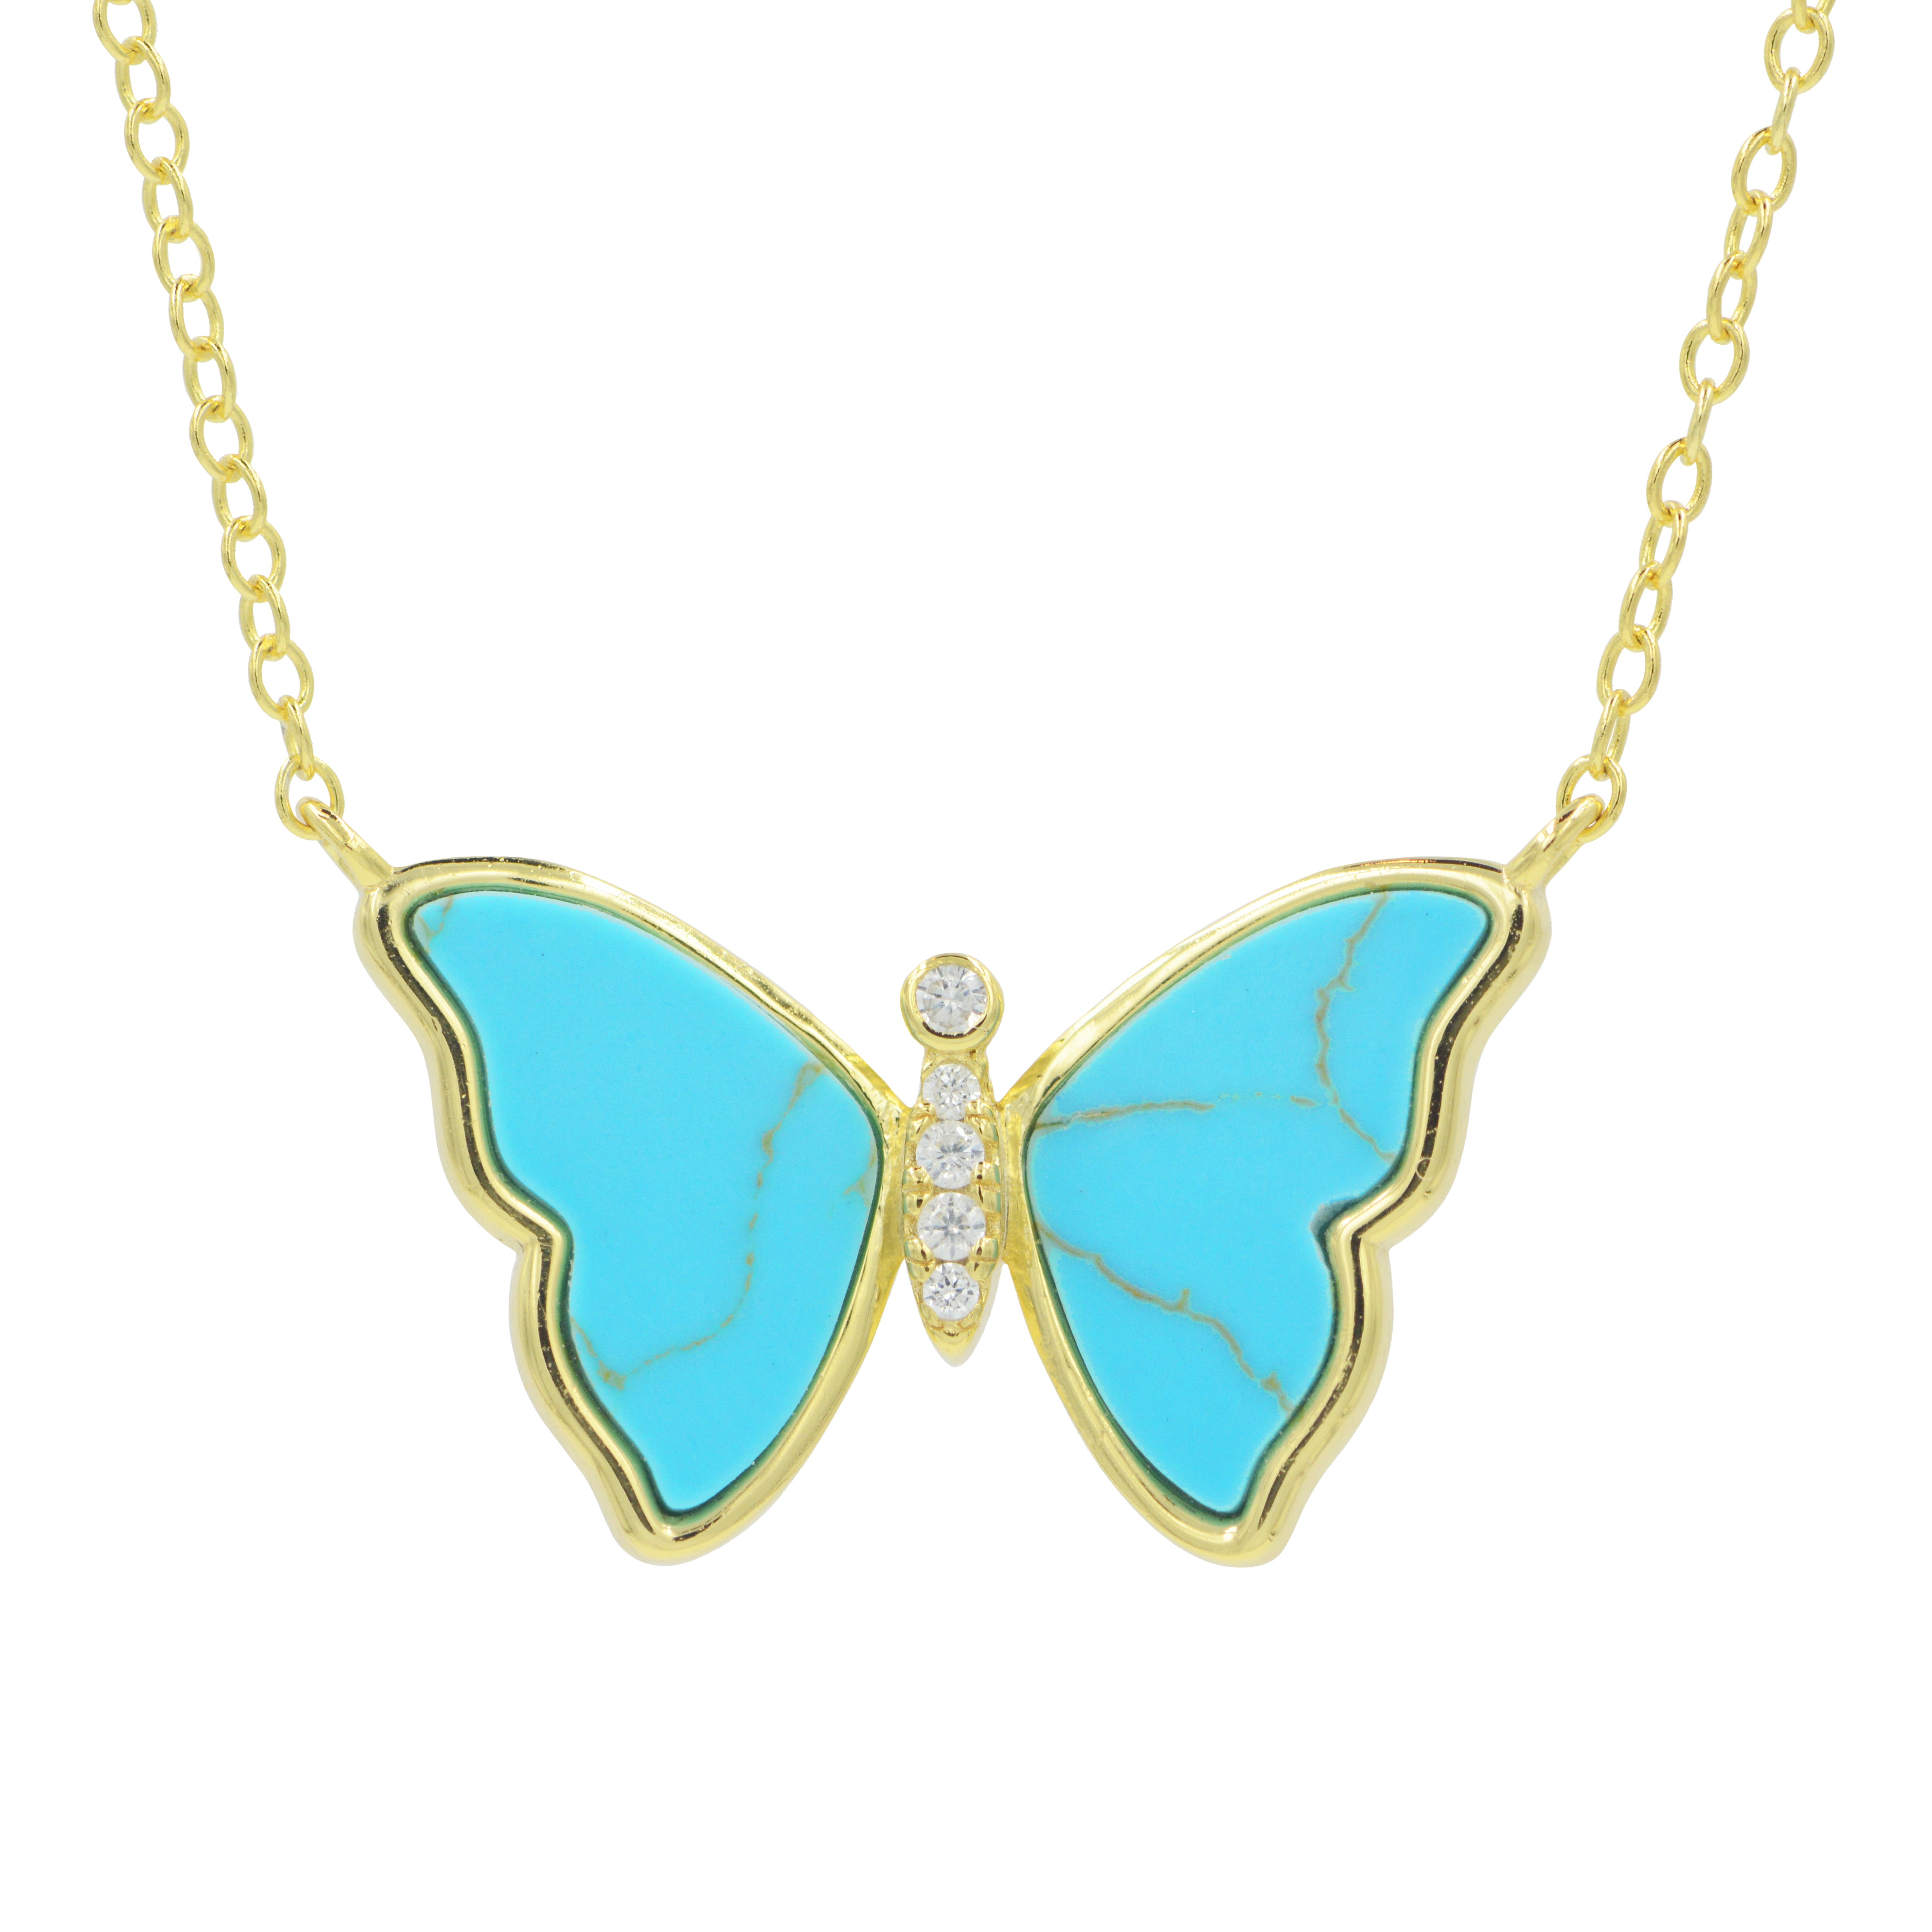 Turquoise Butterfly Necklace With Bezel - KAMARIA